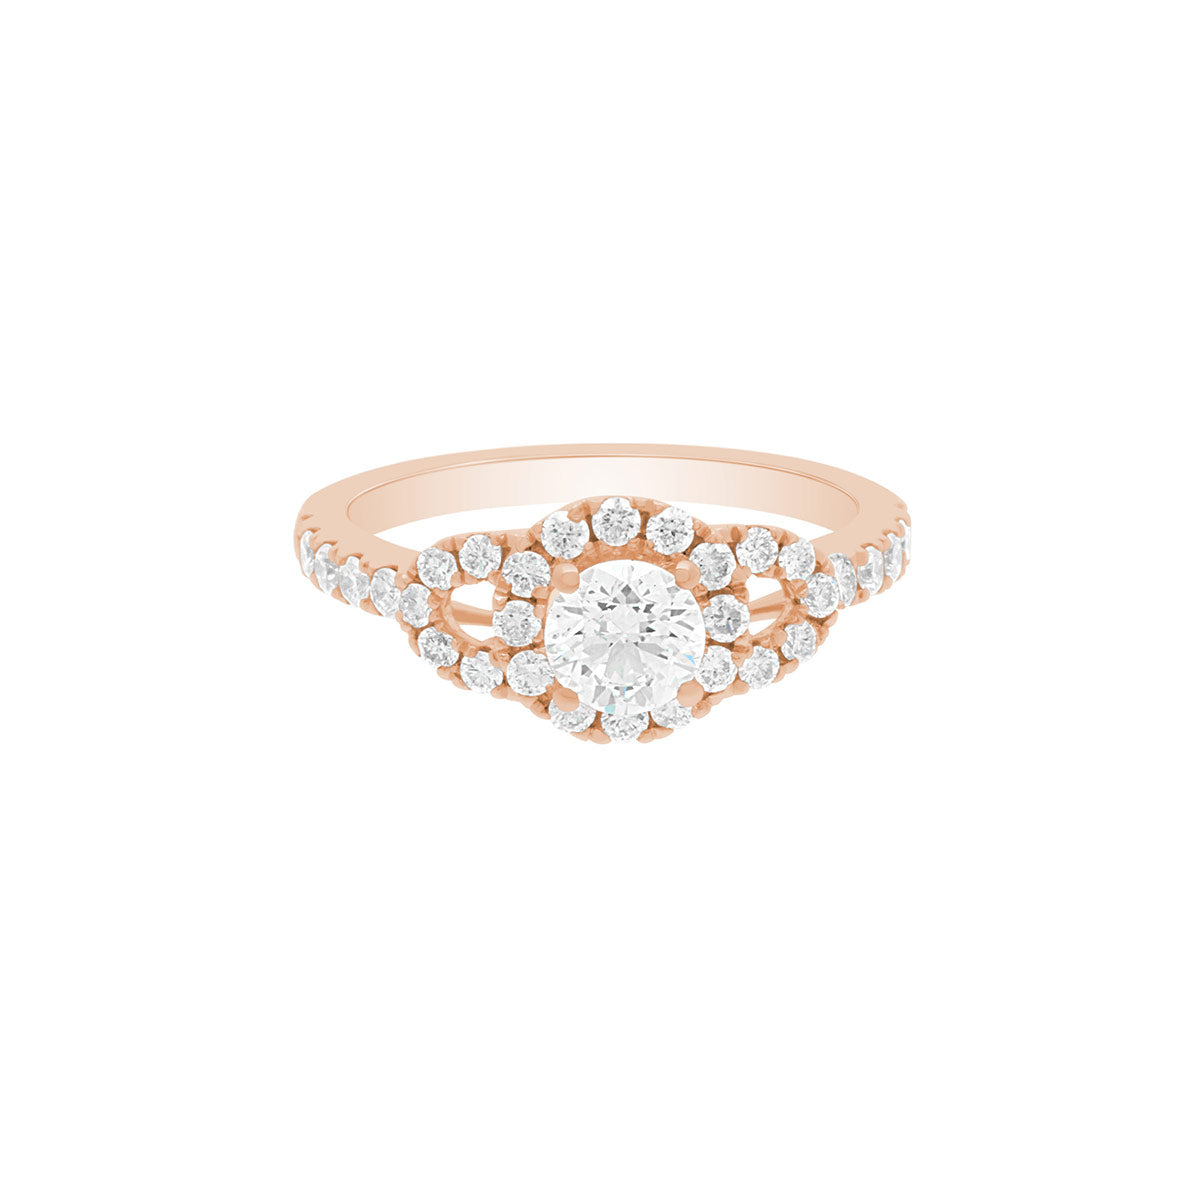 Triple Halo Engagement Ring  in rose gold laying flat, with white background